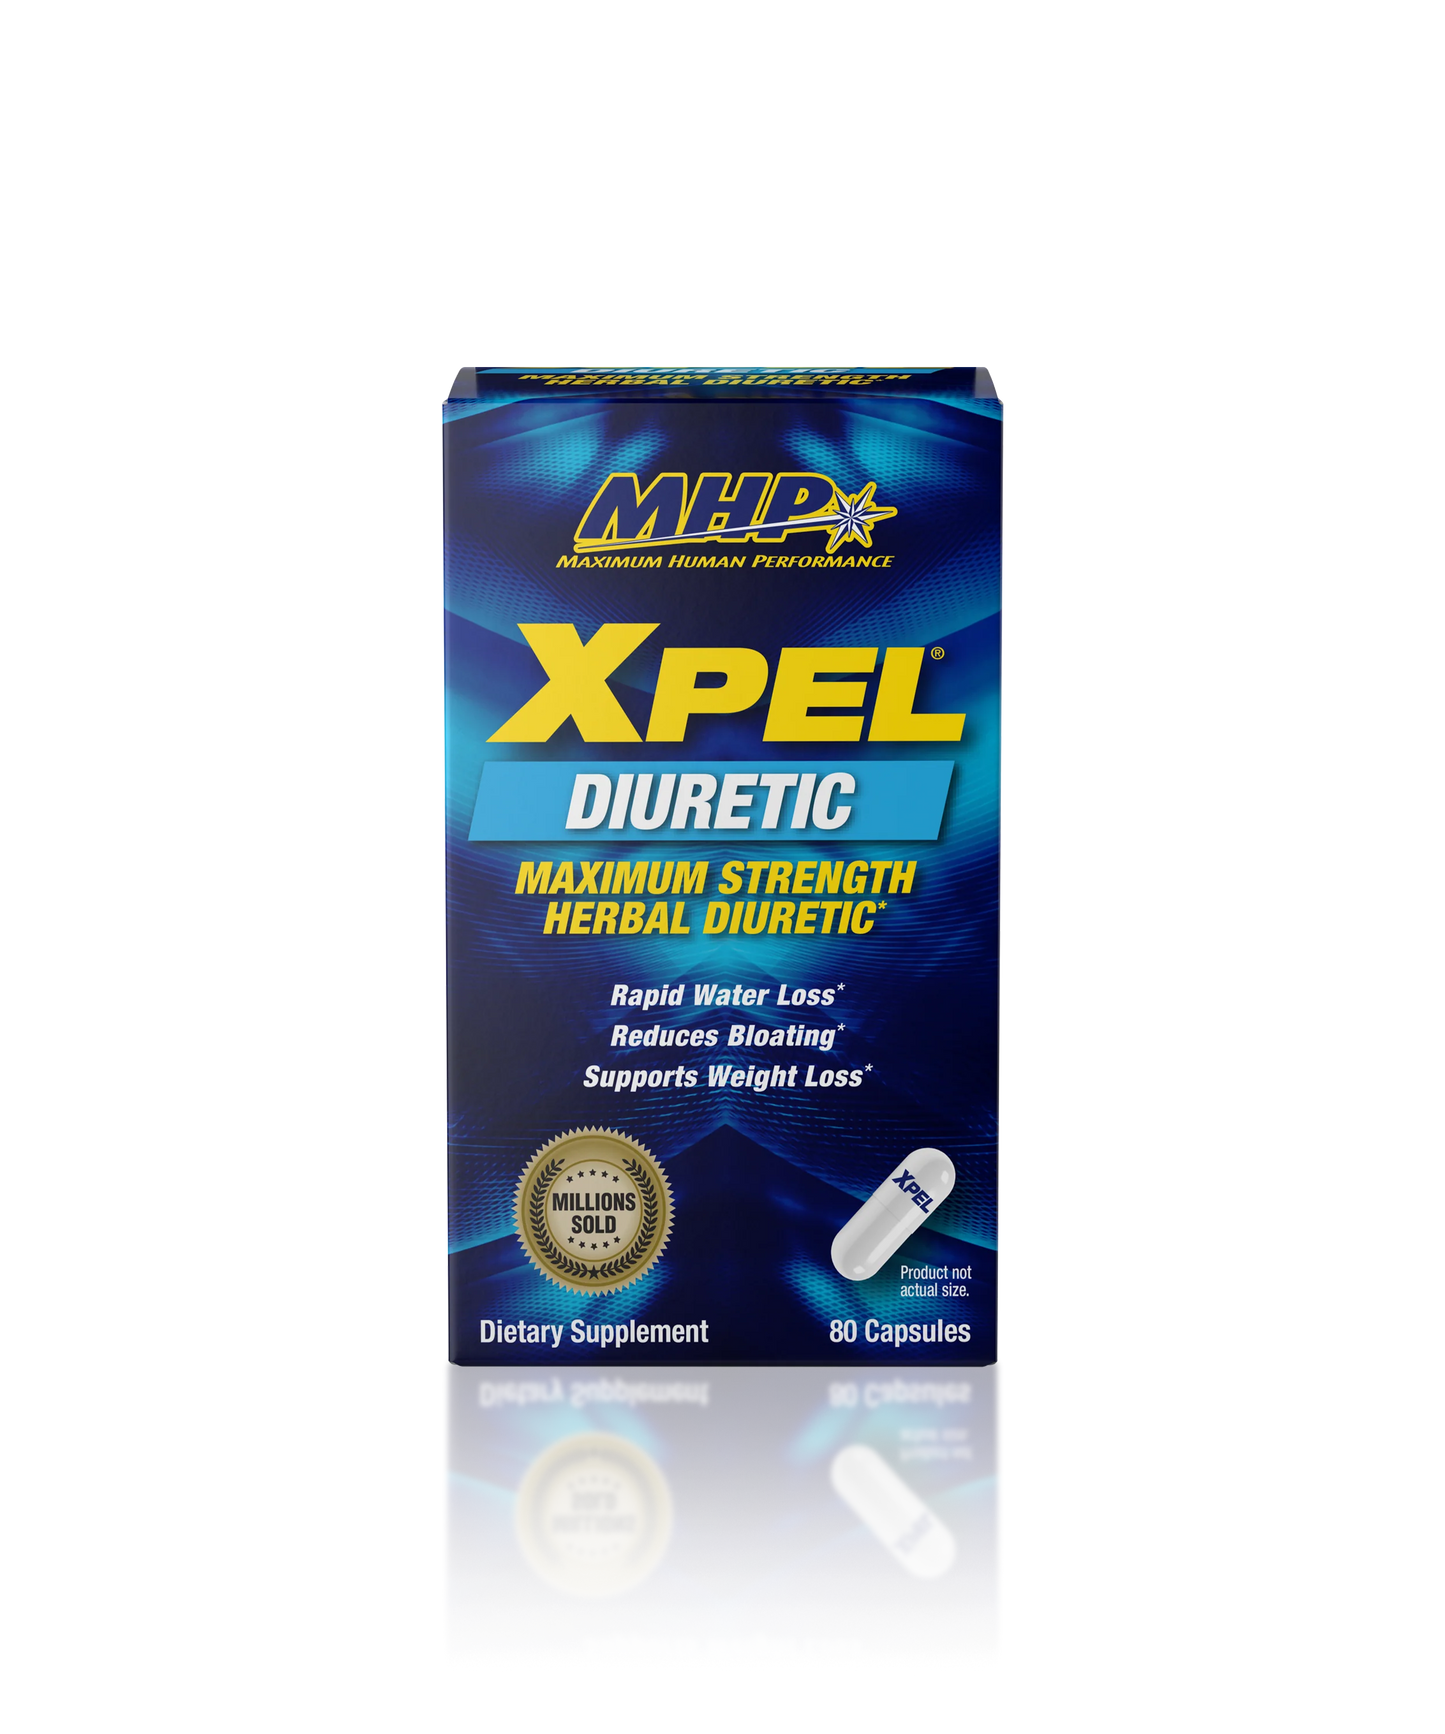 Xpel for rapid water loss